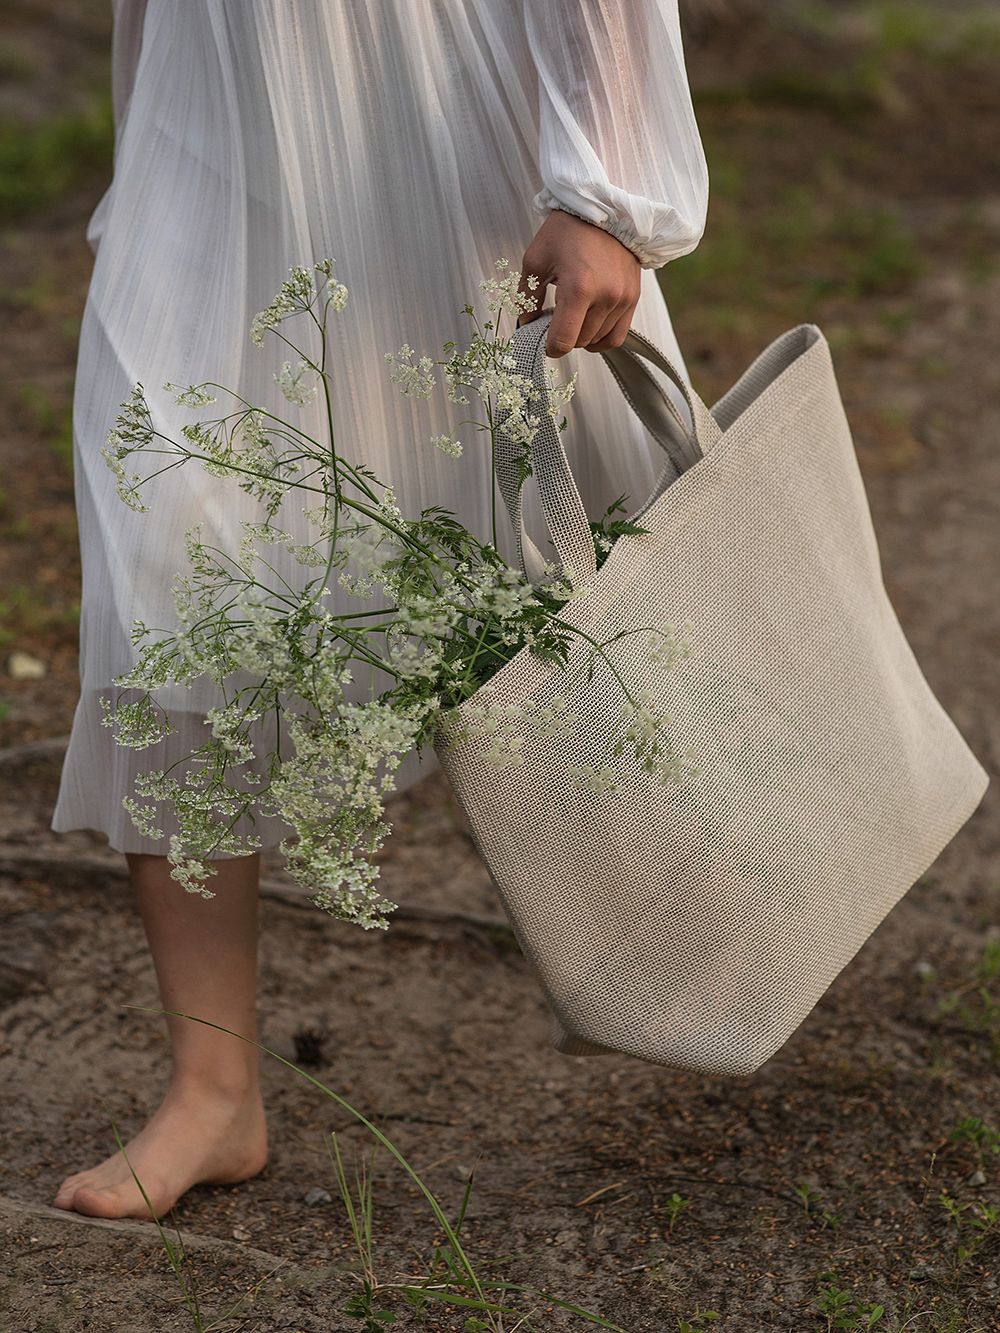 Woman carrying Woodnotes' beige Beach bag that has wild flowers in it